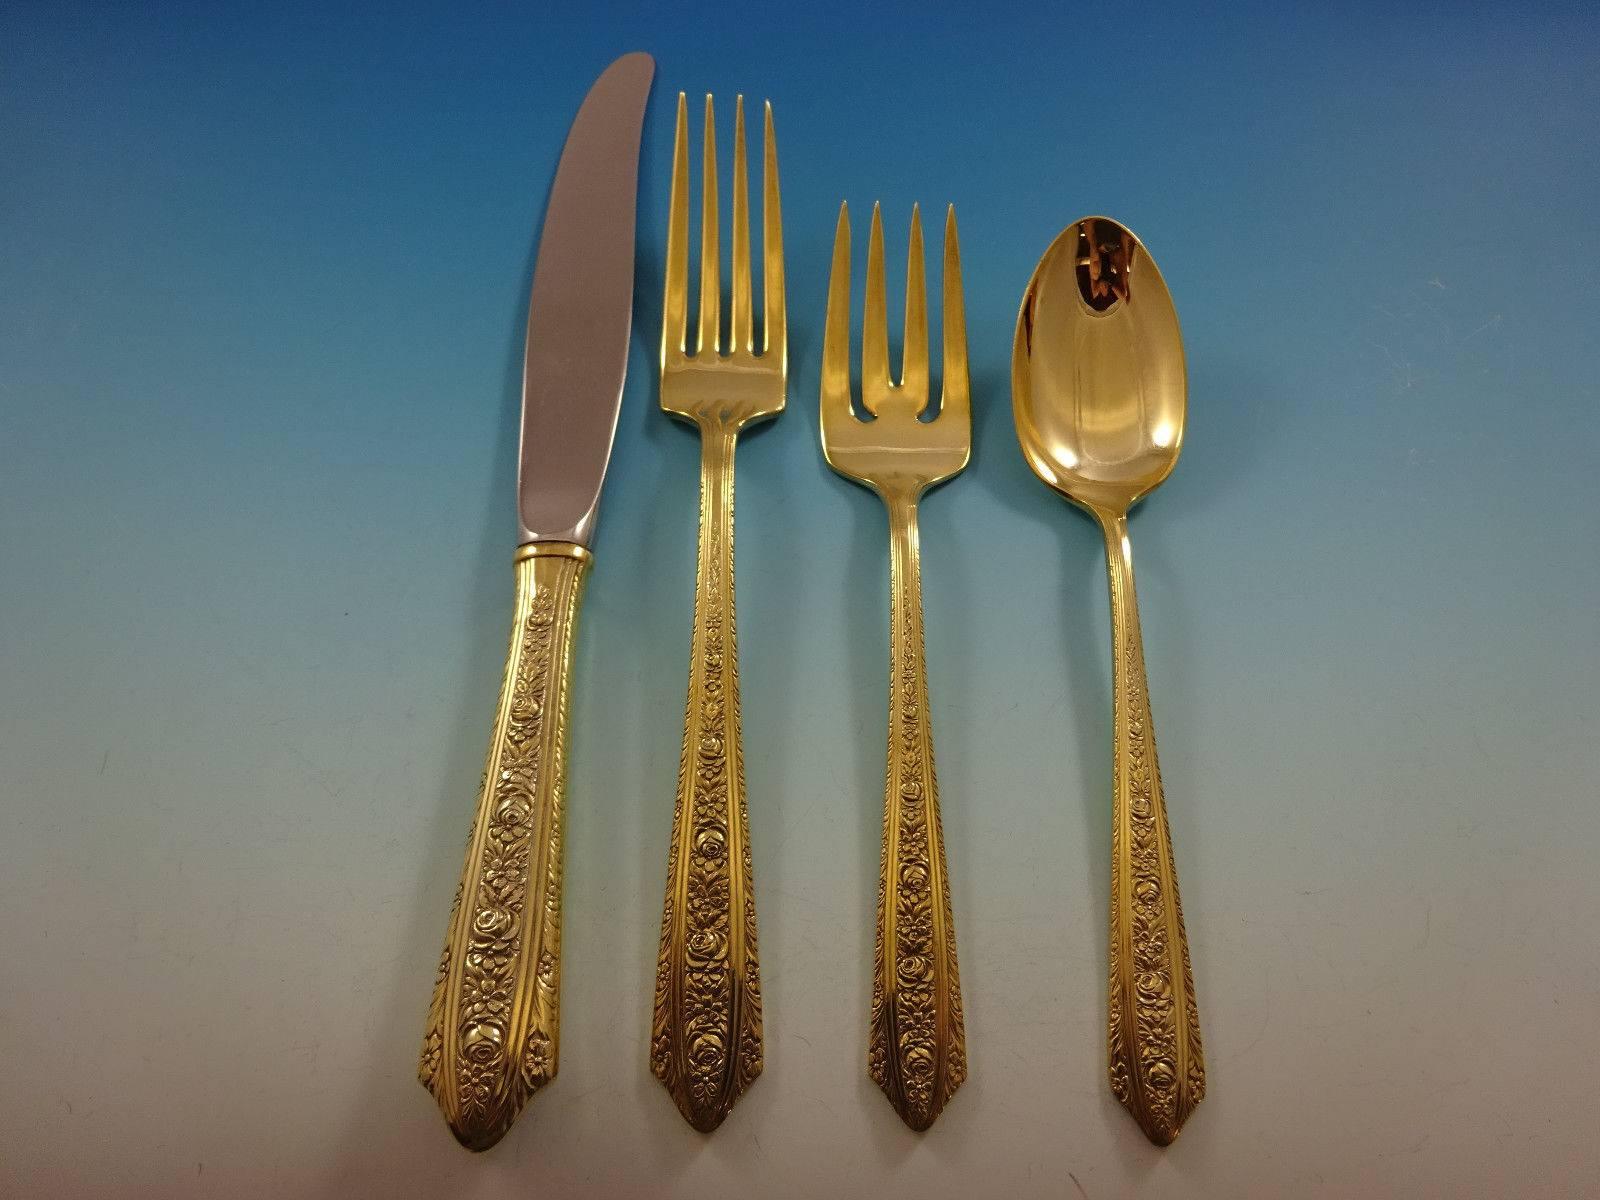 Add some luxe to your life with this fabulous Normandie Gold by Wallace sterling silver flatware set of 32 pieces. Gold flatware is on trend and makes a bold statement on your table. 

This set is vermeil (completely gold-washed) and includes:
 